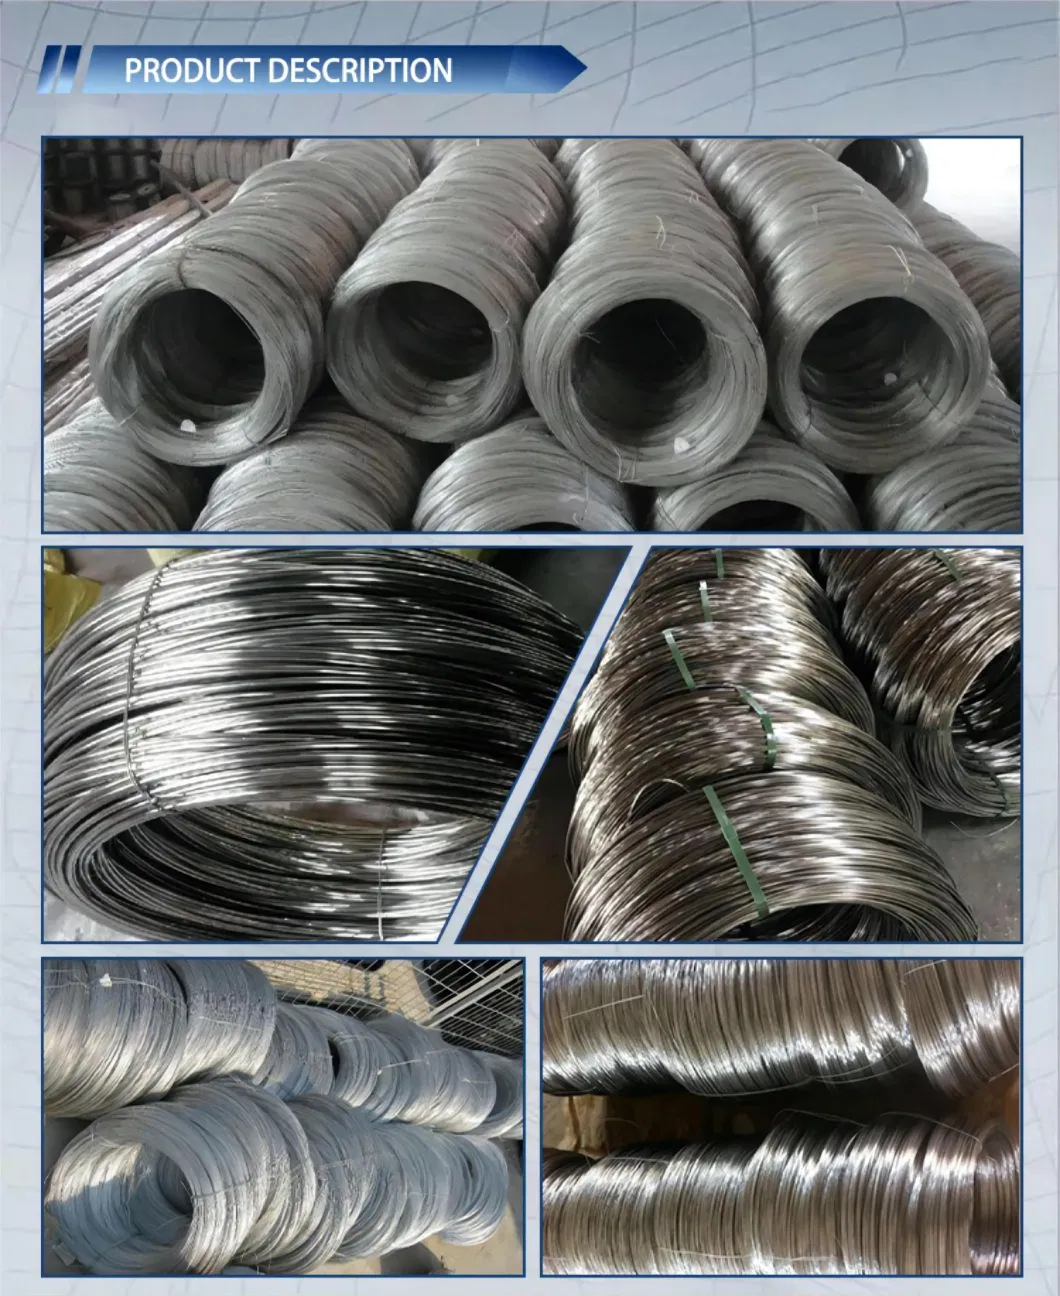 Factory Cold/Hot Rolled 200 300 400 600 900 Series Stainless Steel Sheets Plate Round Square Rectangle Tube Pipe Tubing Piping Tubes Coil Strip Bar Wire